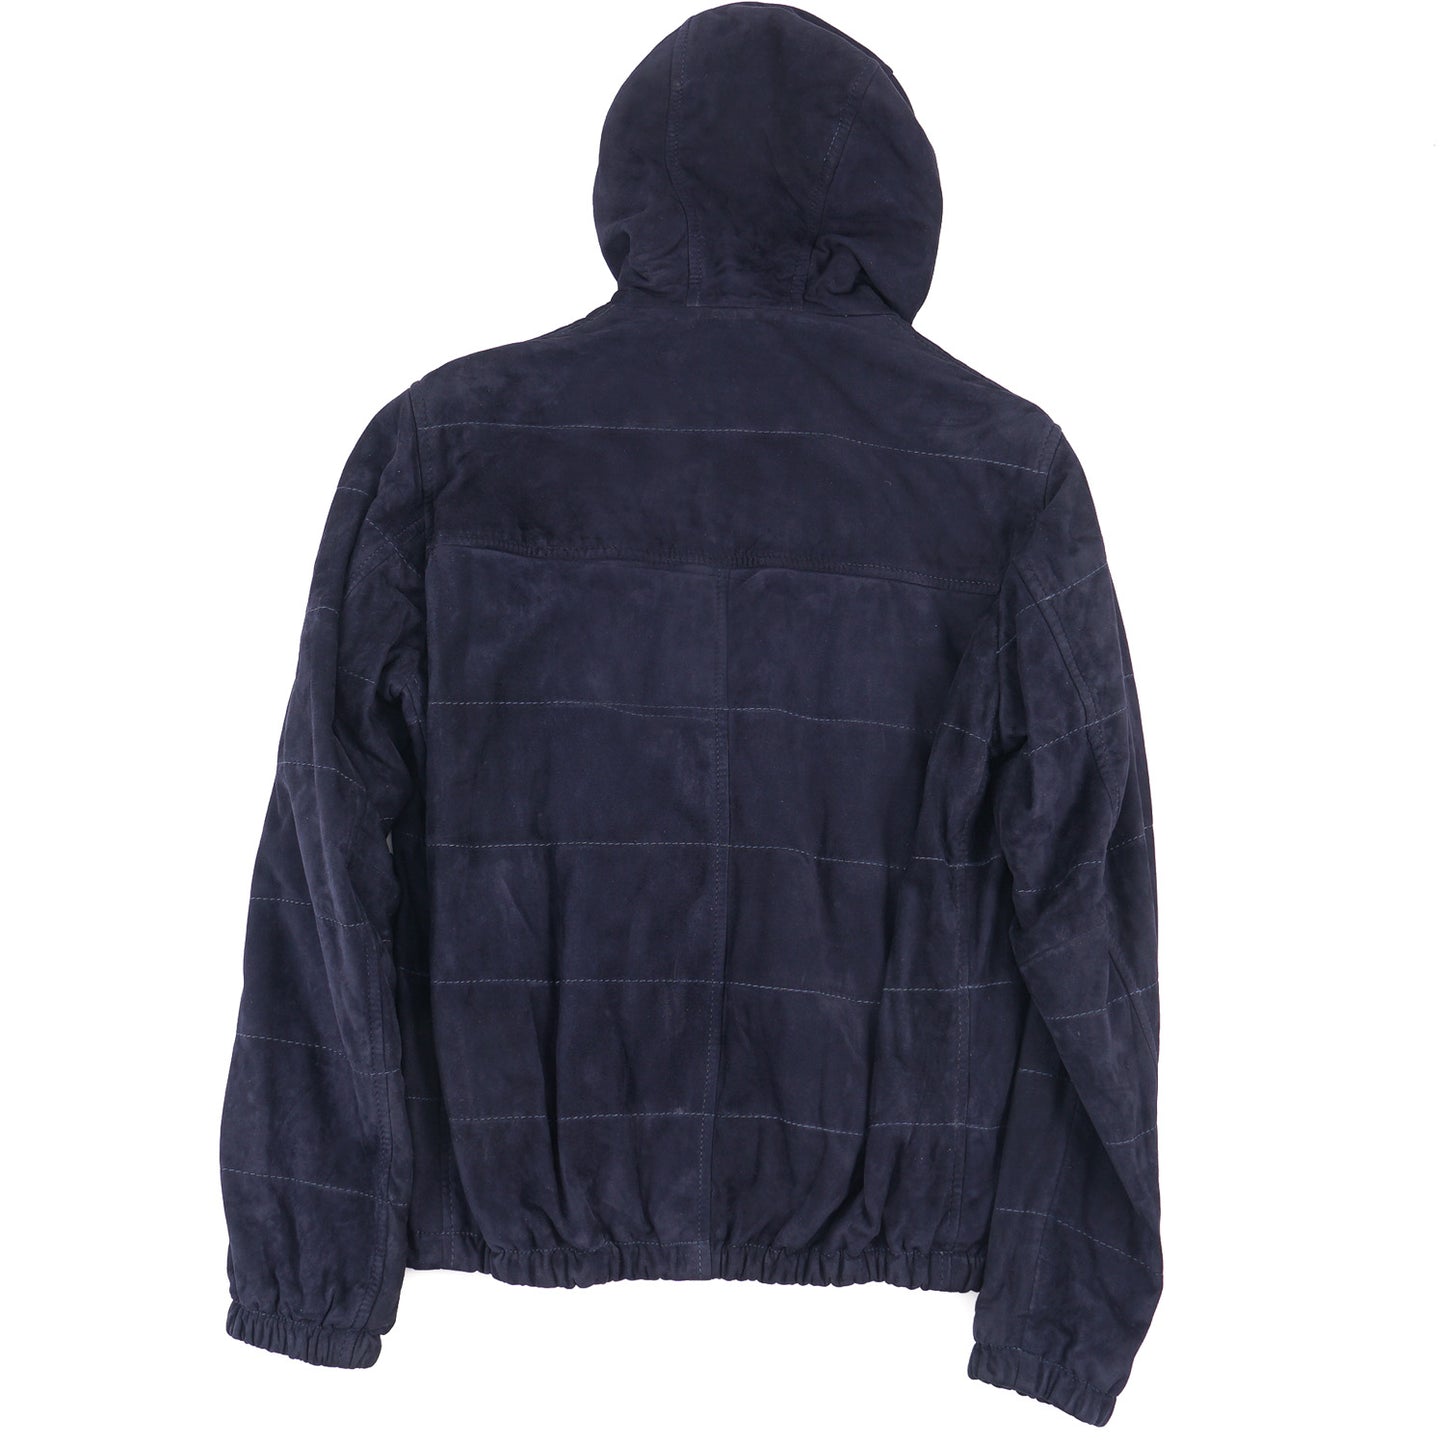 Borrelli Quilted Suede Jacket with Hood - Top Shelf Apparel